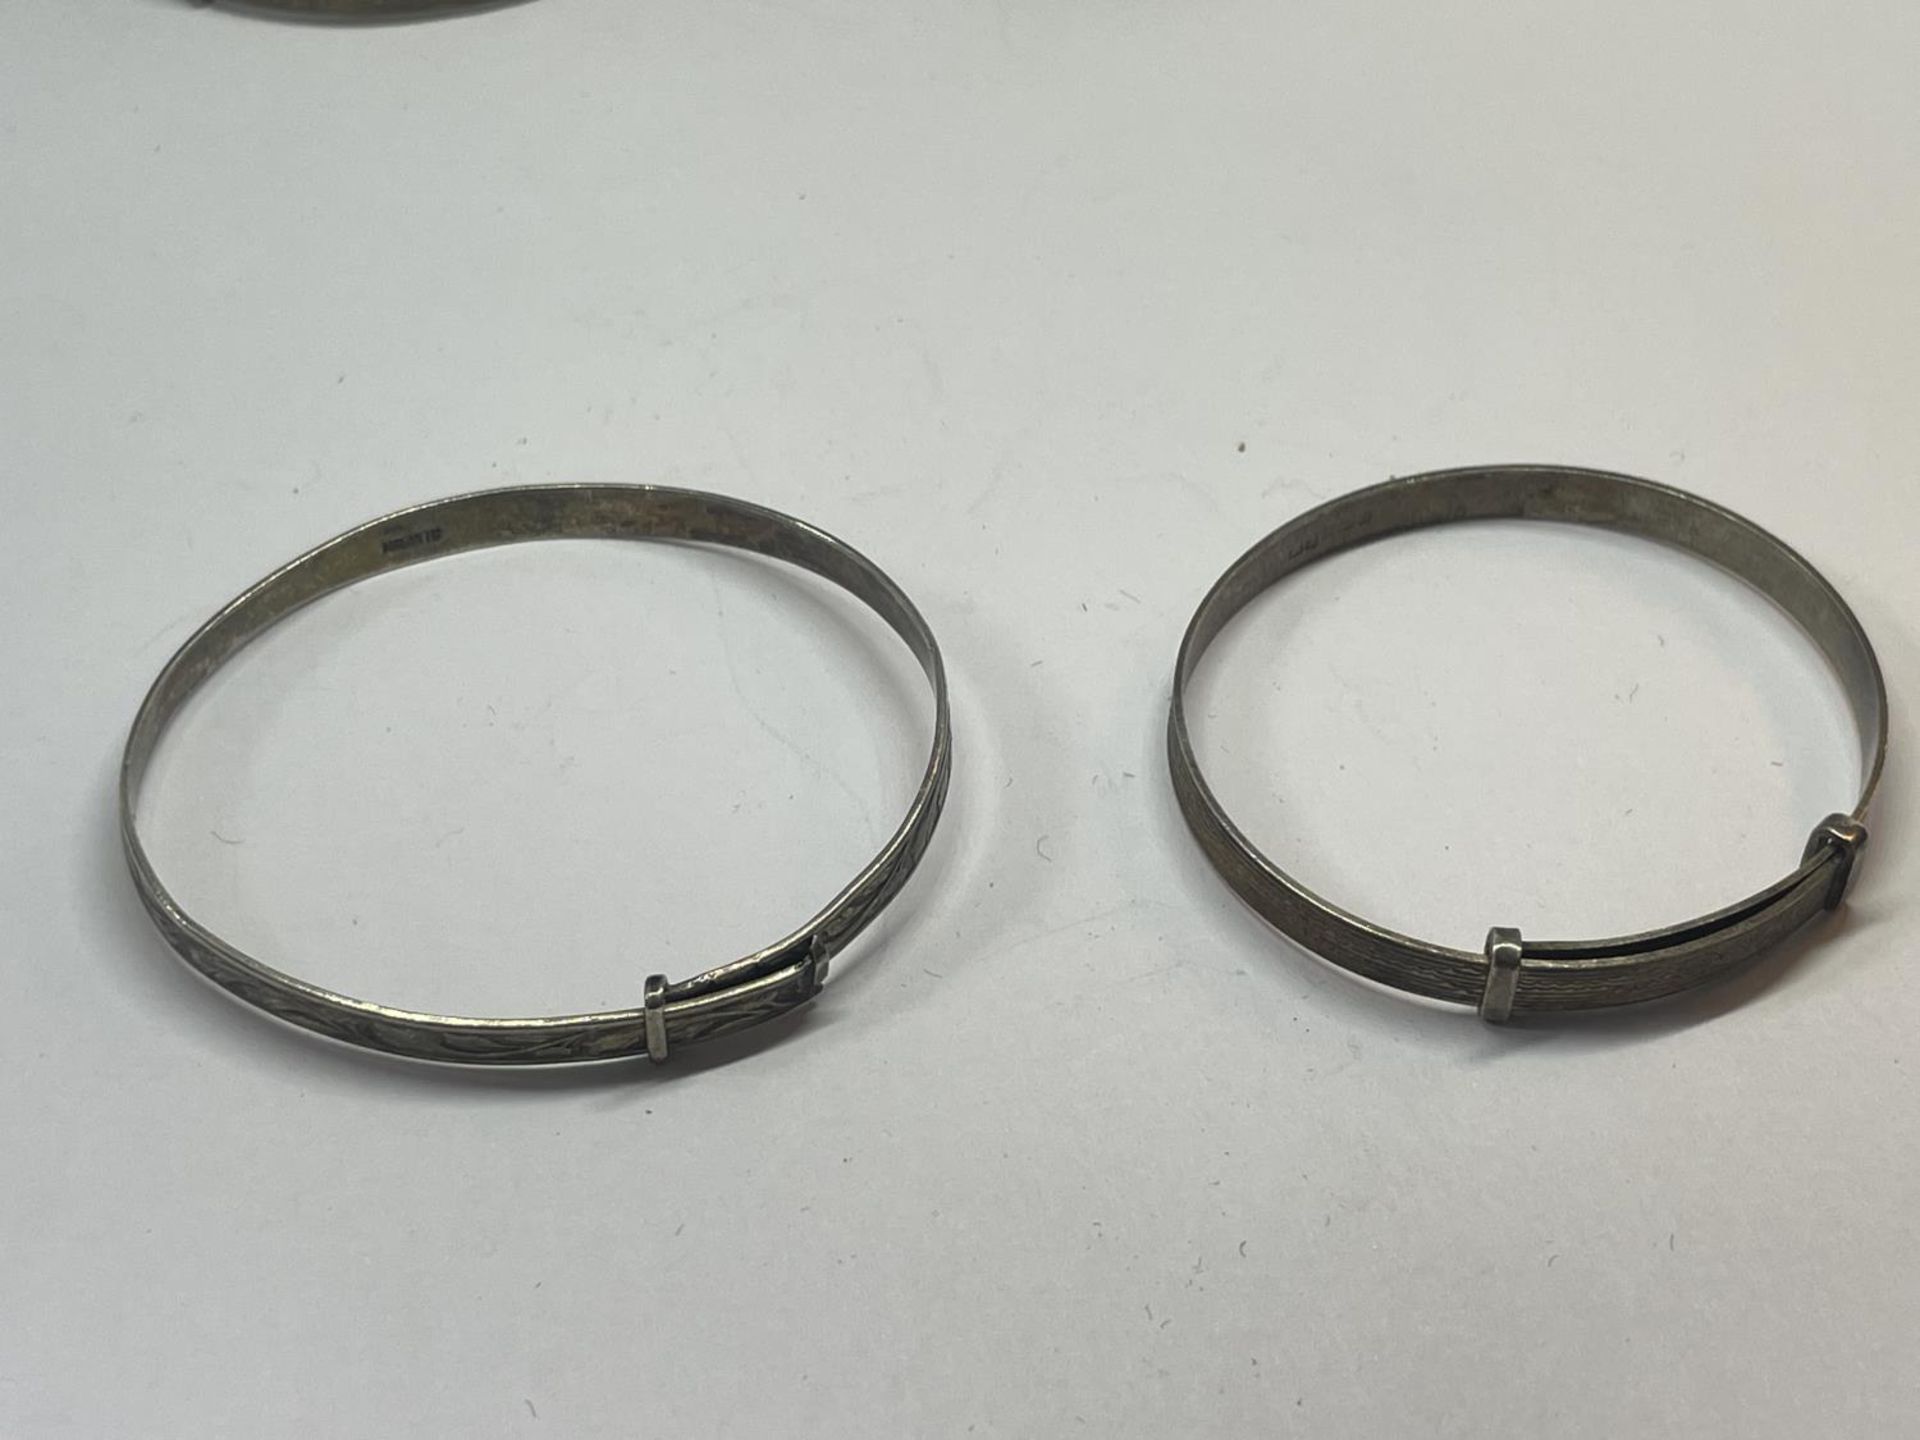 FOUR SILVER BABY BANGLES - Image 3 of 3